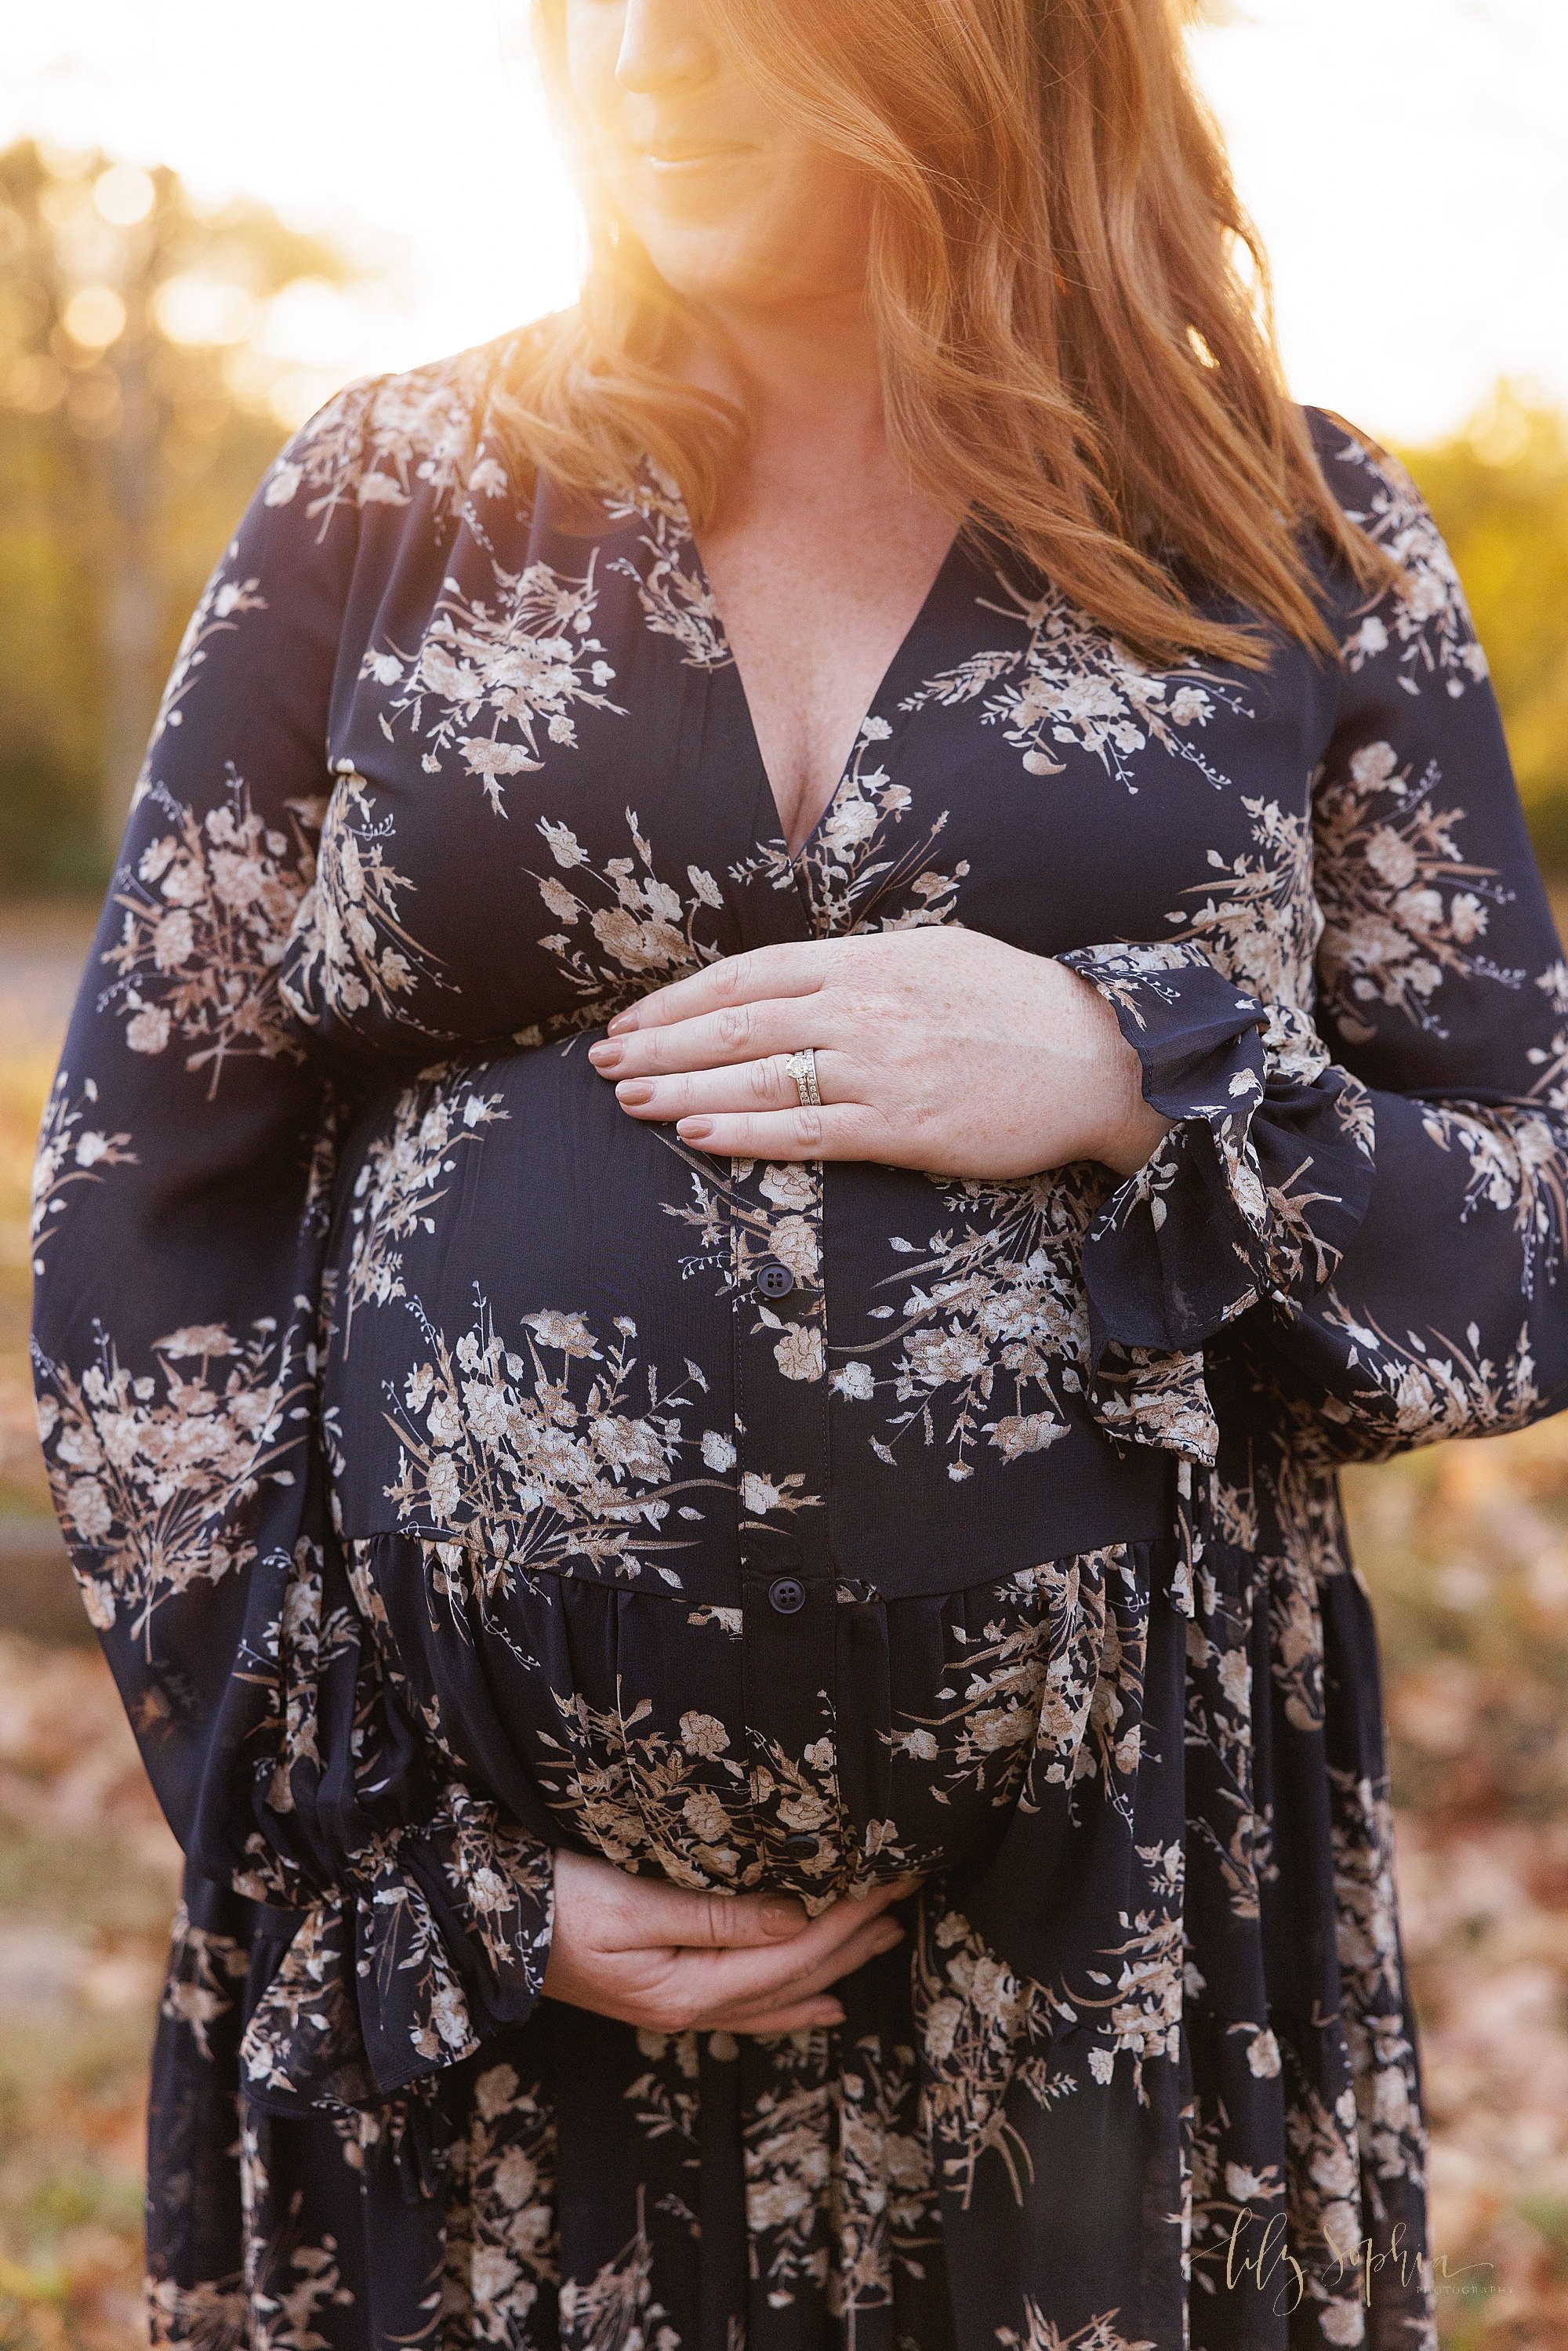  Close-up photo of the belly of an expectant mother framed with her hands for a maternity photo shoot at sunset during autumn in an Atlanta park. 